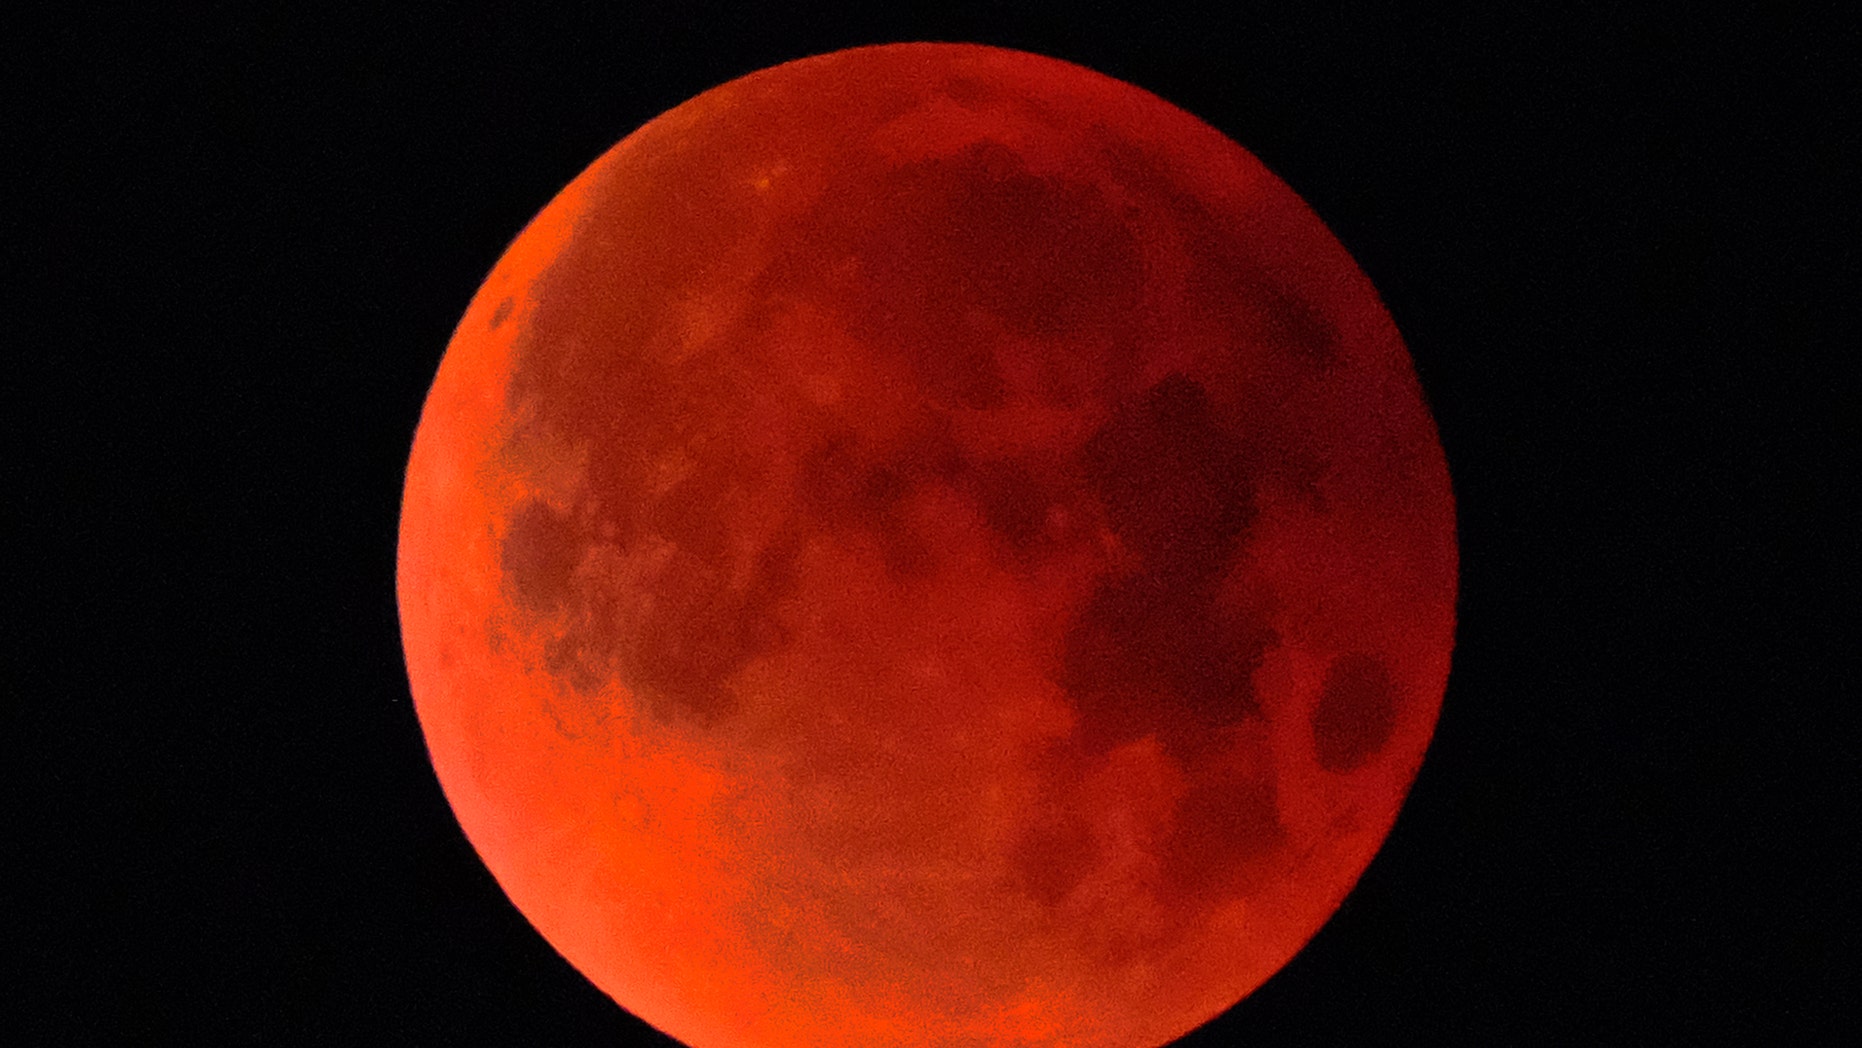 Rare 'super blood Moon' eclipse to put on stunning display in January